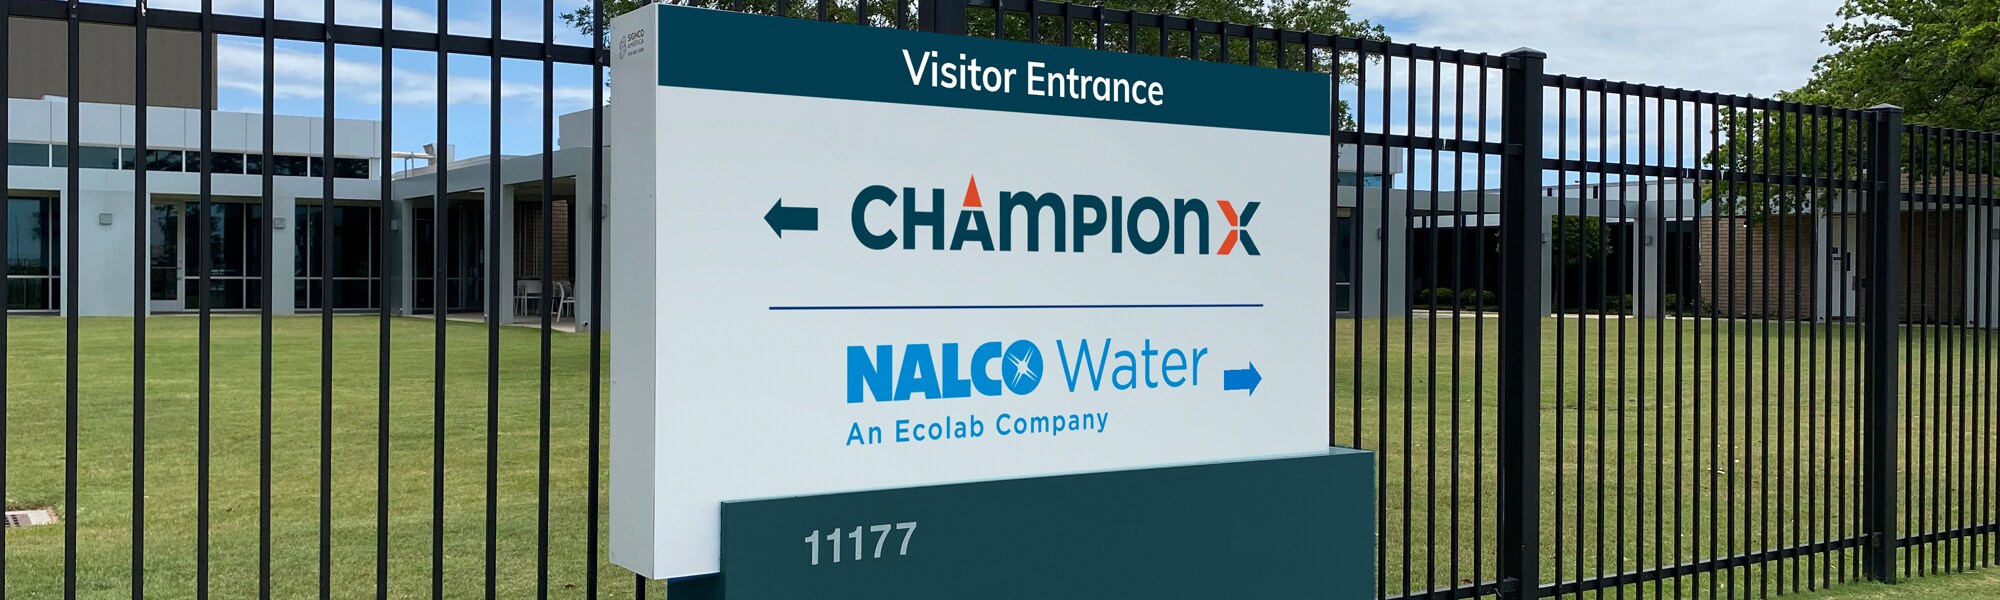  Sign at entrance of Nalco Water office that reads "Visitor Entrance" and directs visitors to proceed left for ChampionX and right for Nalco Water.